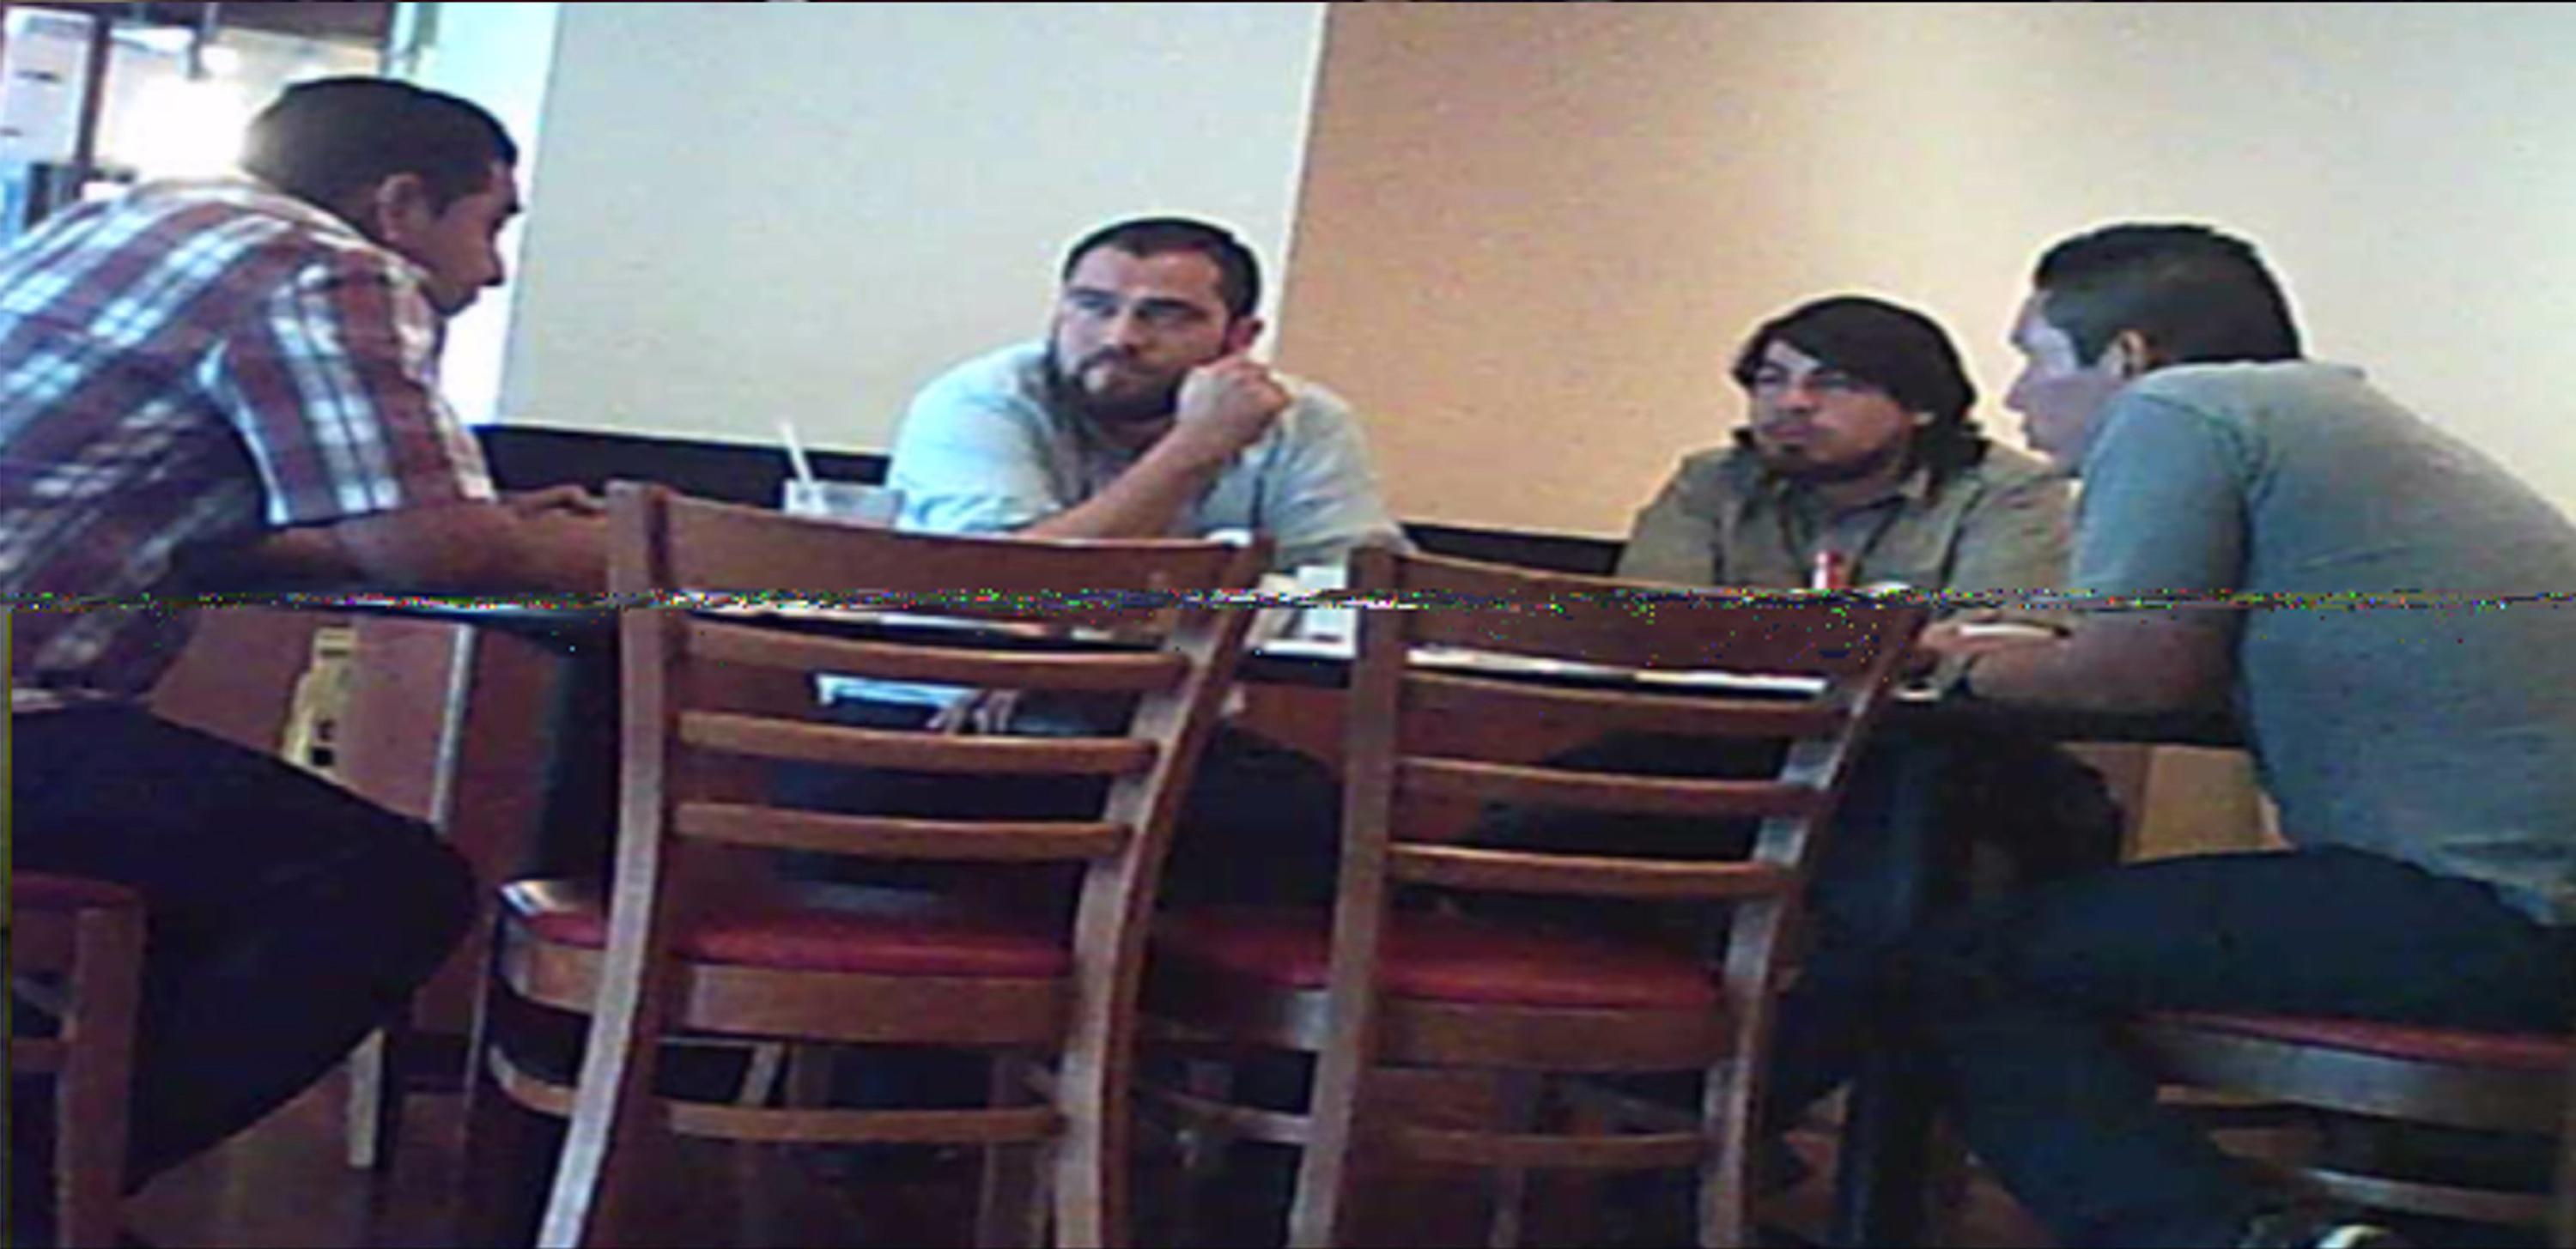 In 2015, the Police mounted 50 surveillance operations targeting gang leaders. In the course of one of these operations, on December 21, 2015, agents photographed Minister Mario Durán (then-councilman, center-left) and Carlos Marroquín (then-employee of the Mayor’s Office, center-right) with Renuente (far-left, checkered shirt) and White of Iberias (far right), of the Mara Salvatrucha. El Faro archival photo obtained from National Civil Police.